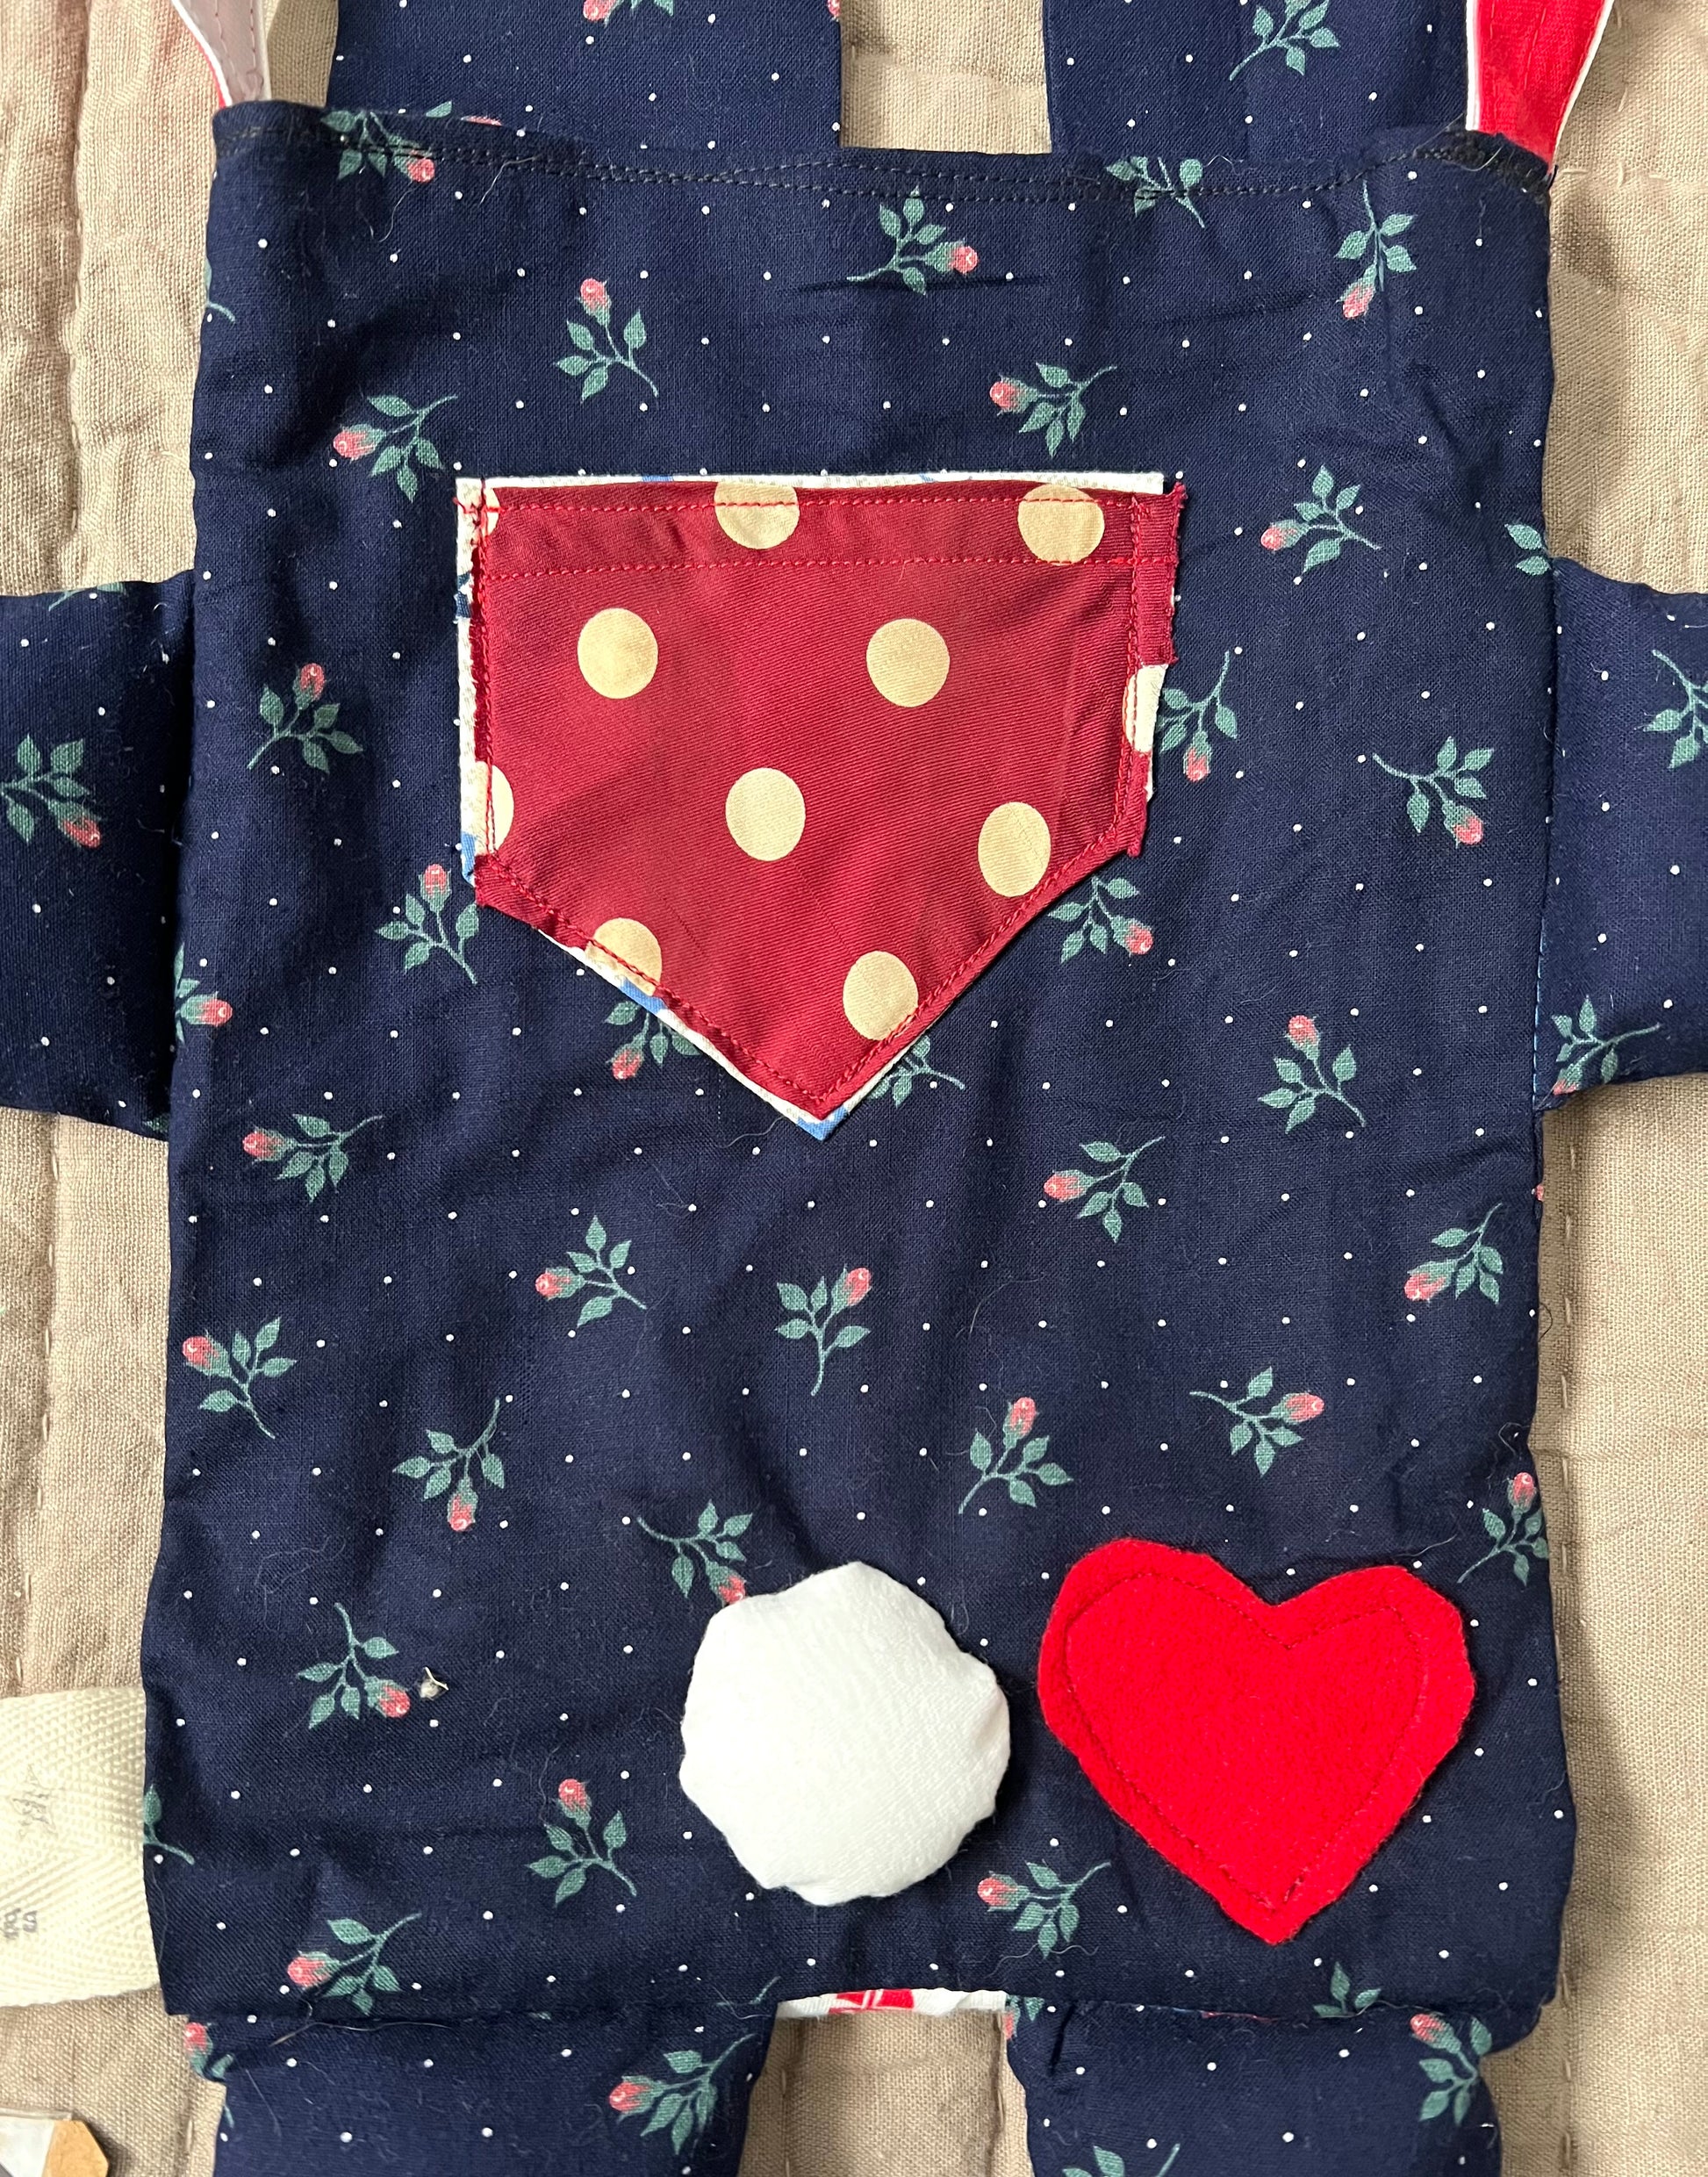 back of bunny tote bag, showing puffy bunny tail, red felt heart on the bum, and a necktie pocket.